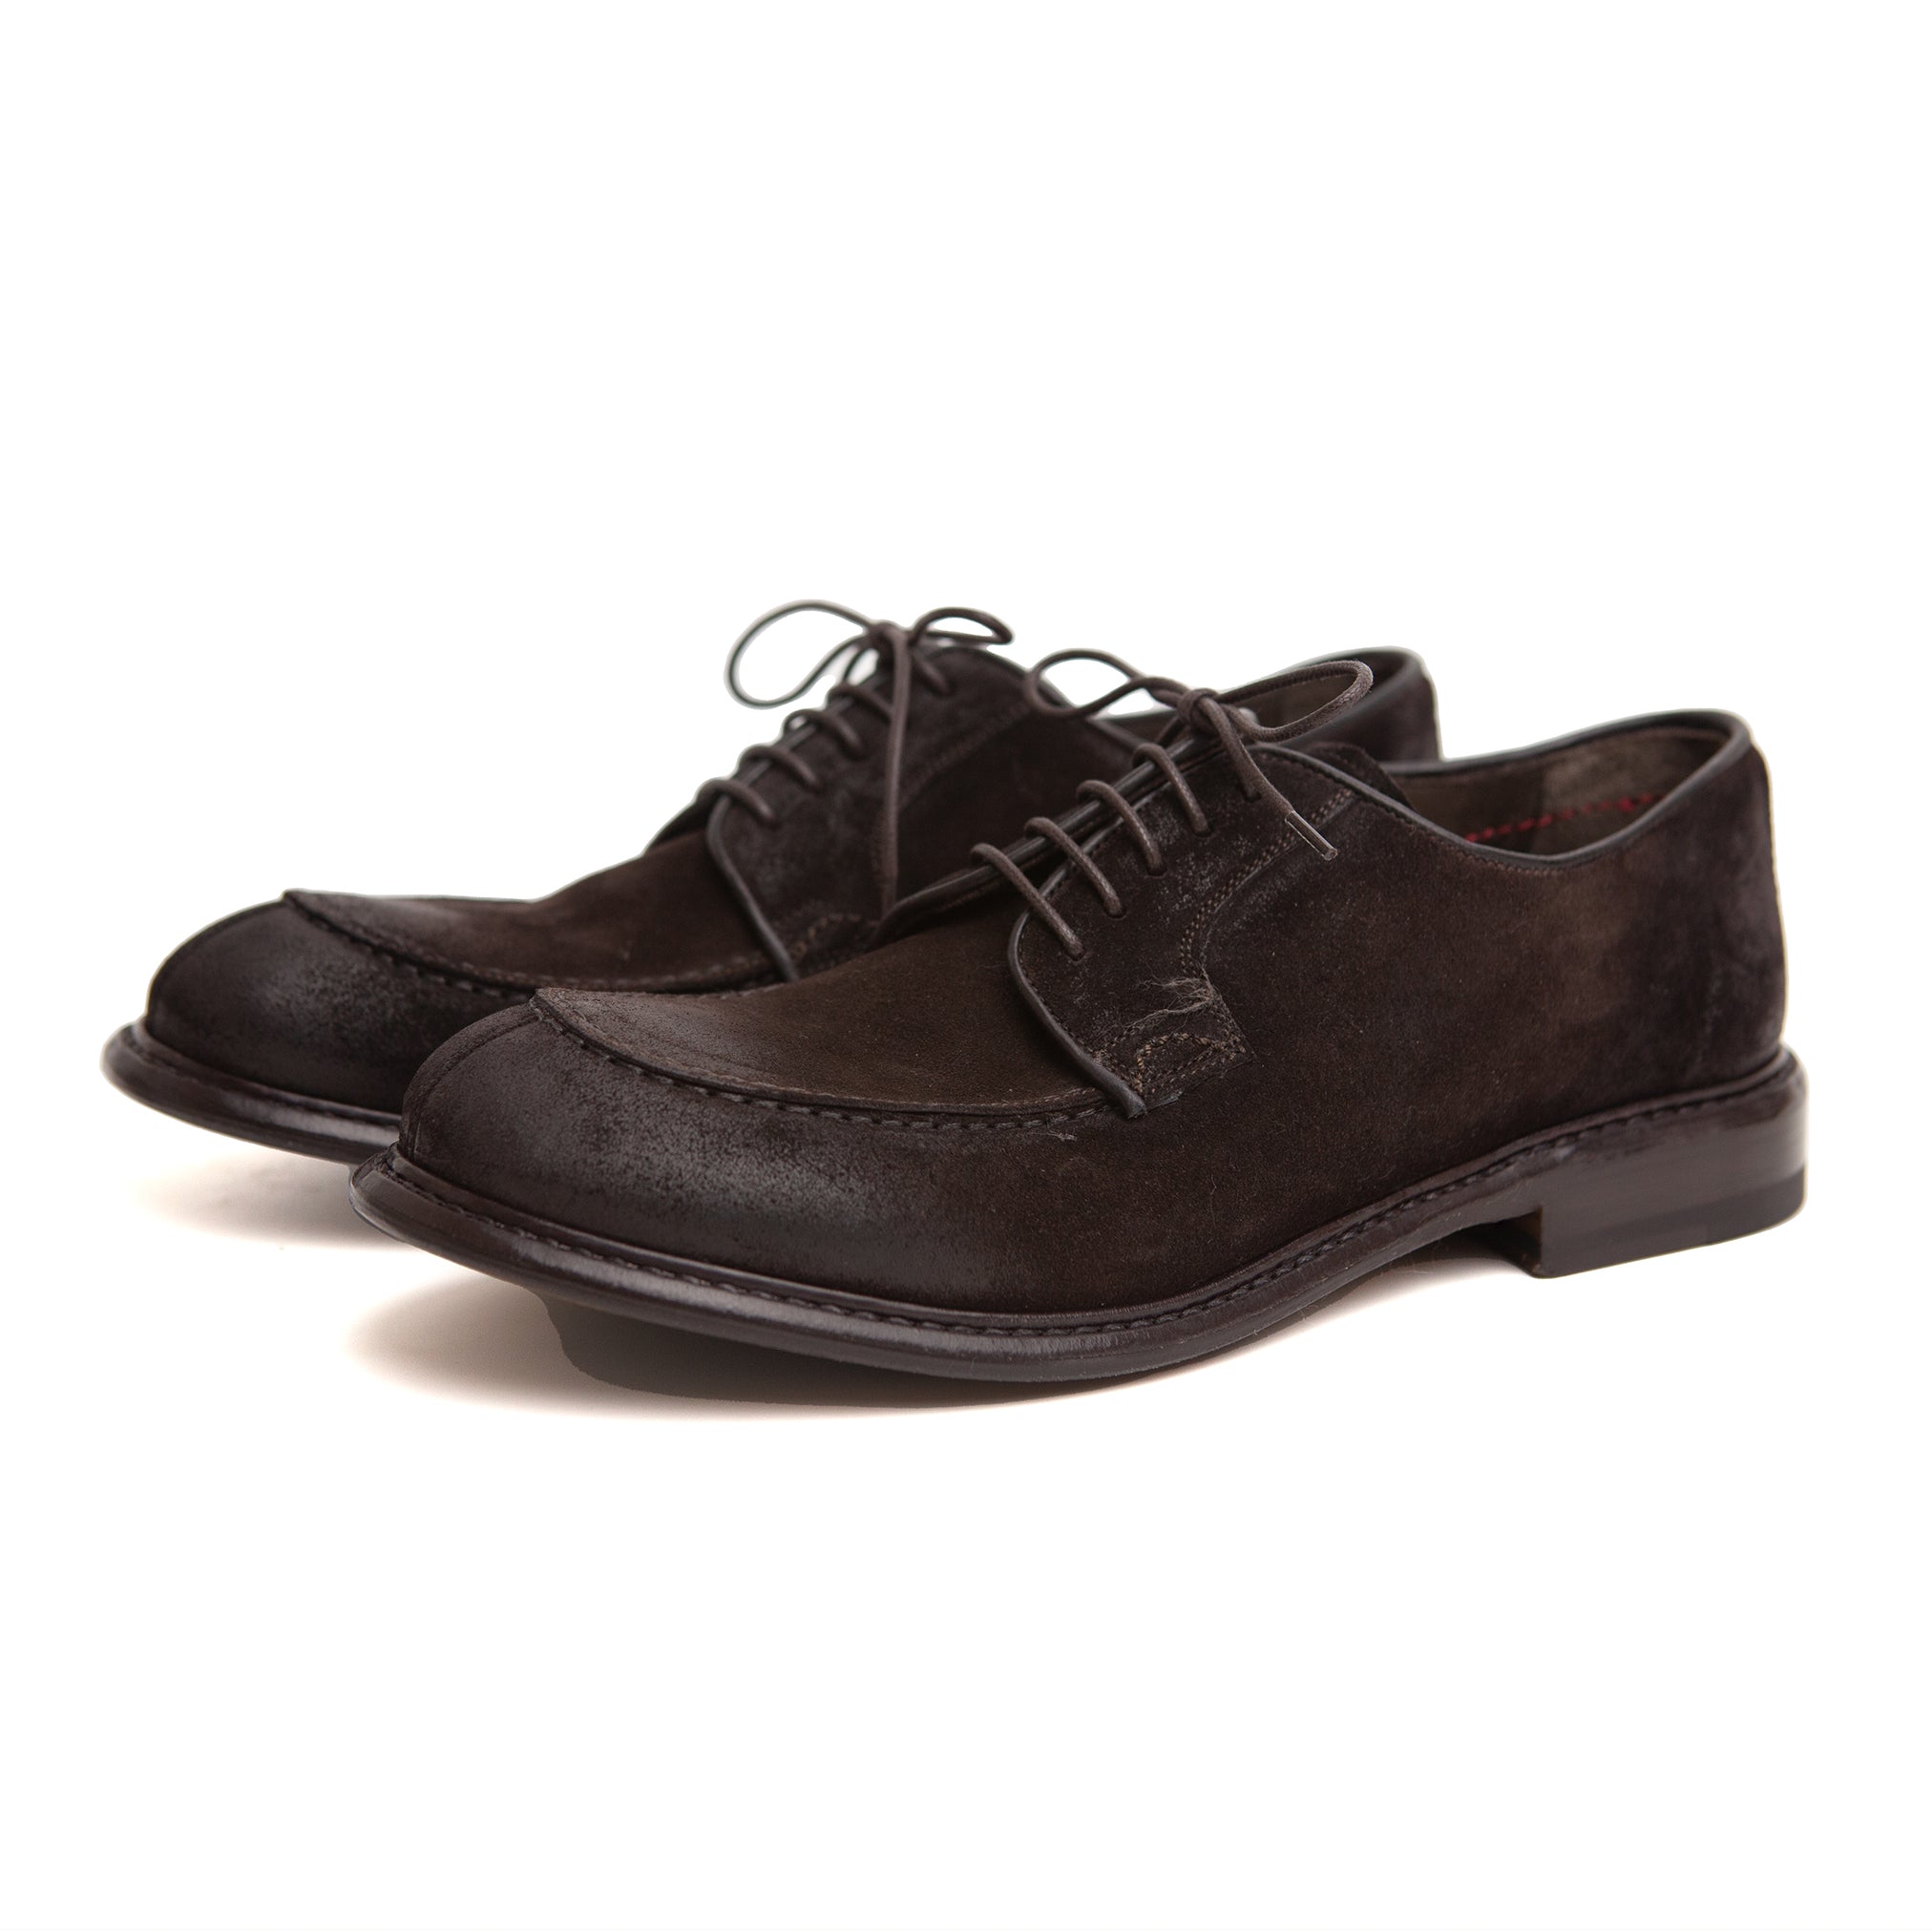 The Derby Shoe in Brown Suede